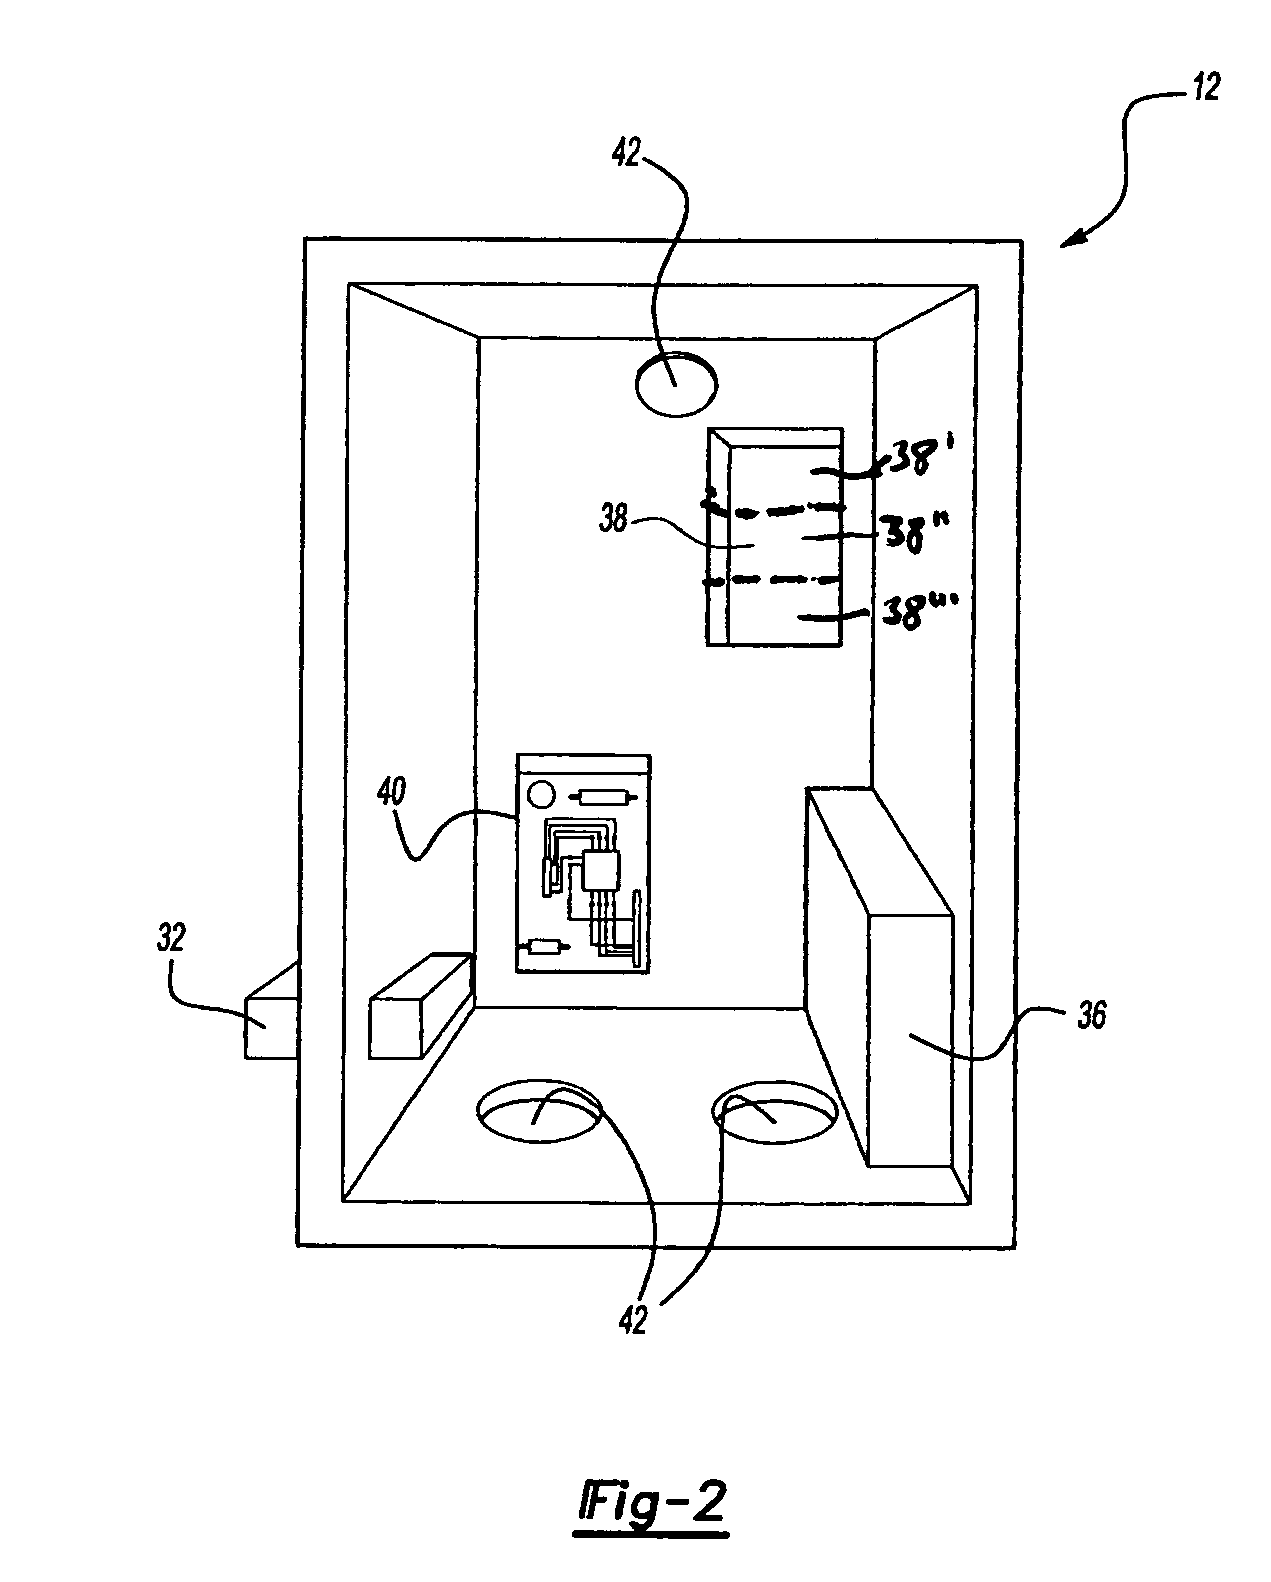 Wireless andon communication method and system